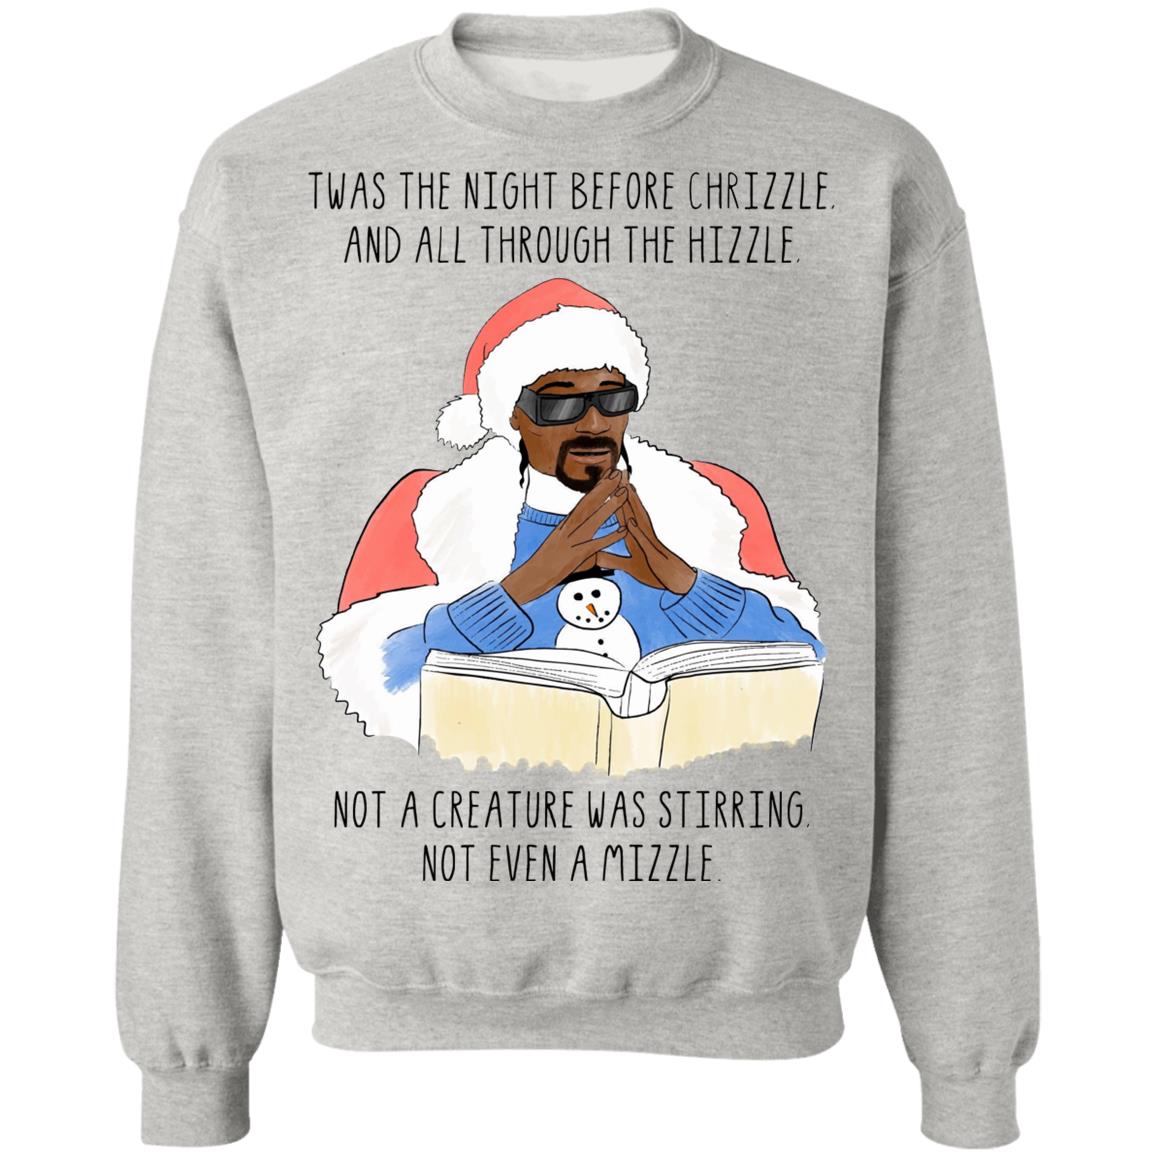 snoop dogg twas the nizzle before christmizzle sweater